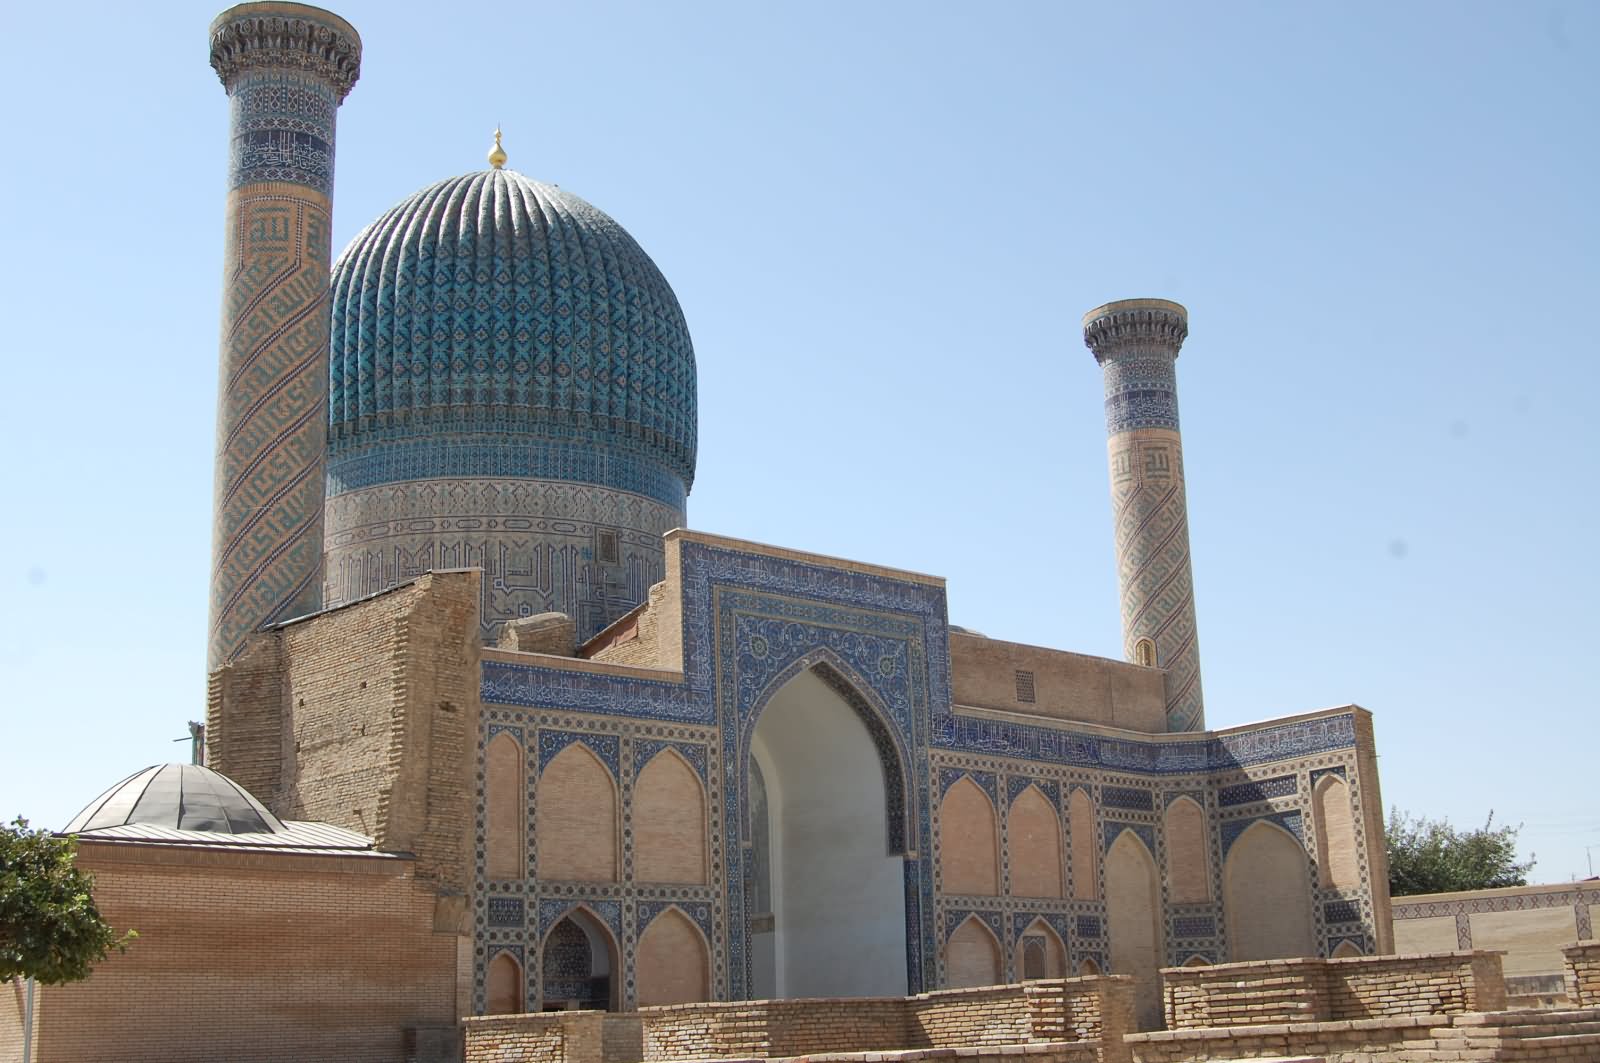 Minarets And Dome Of The Bibi-Khanym Mosque